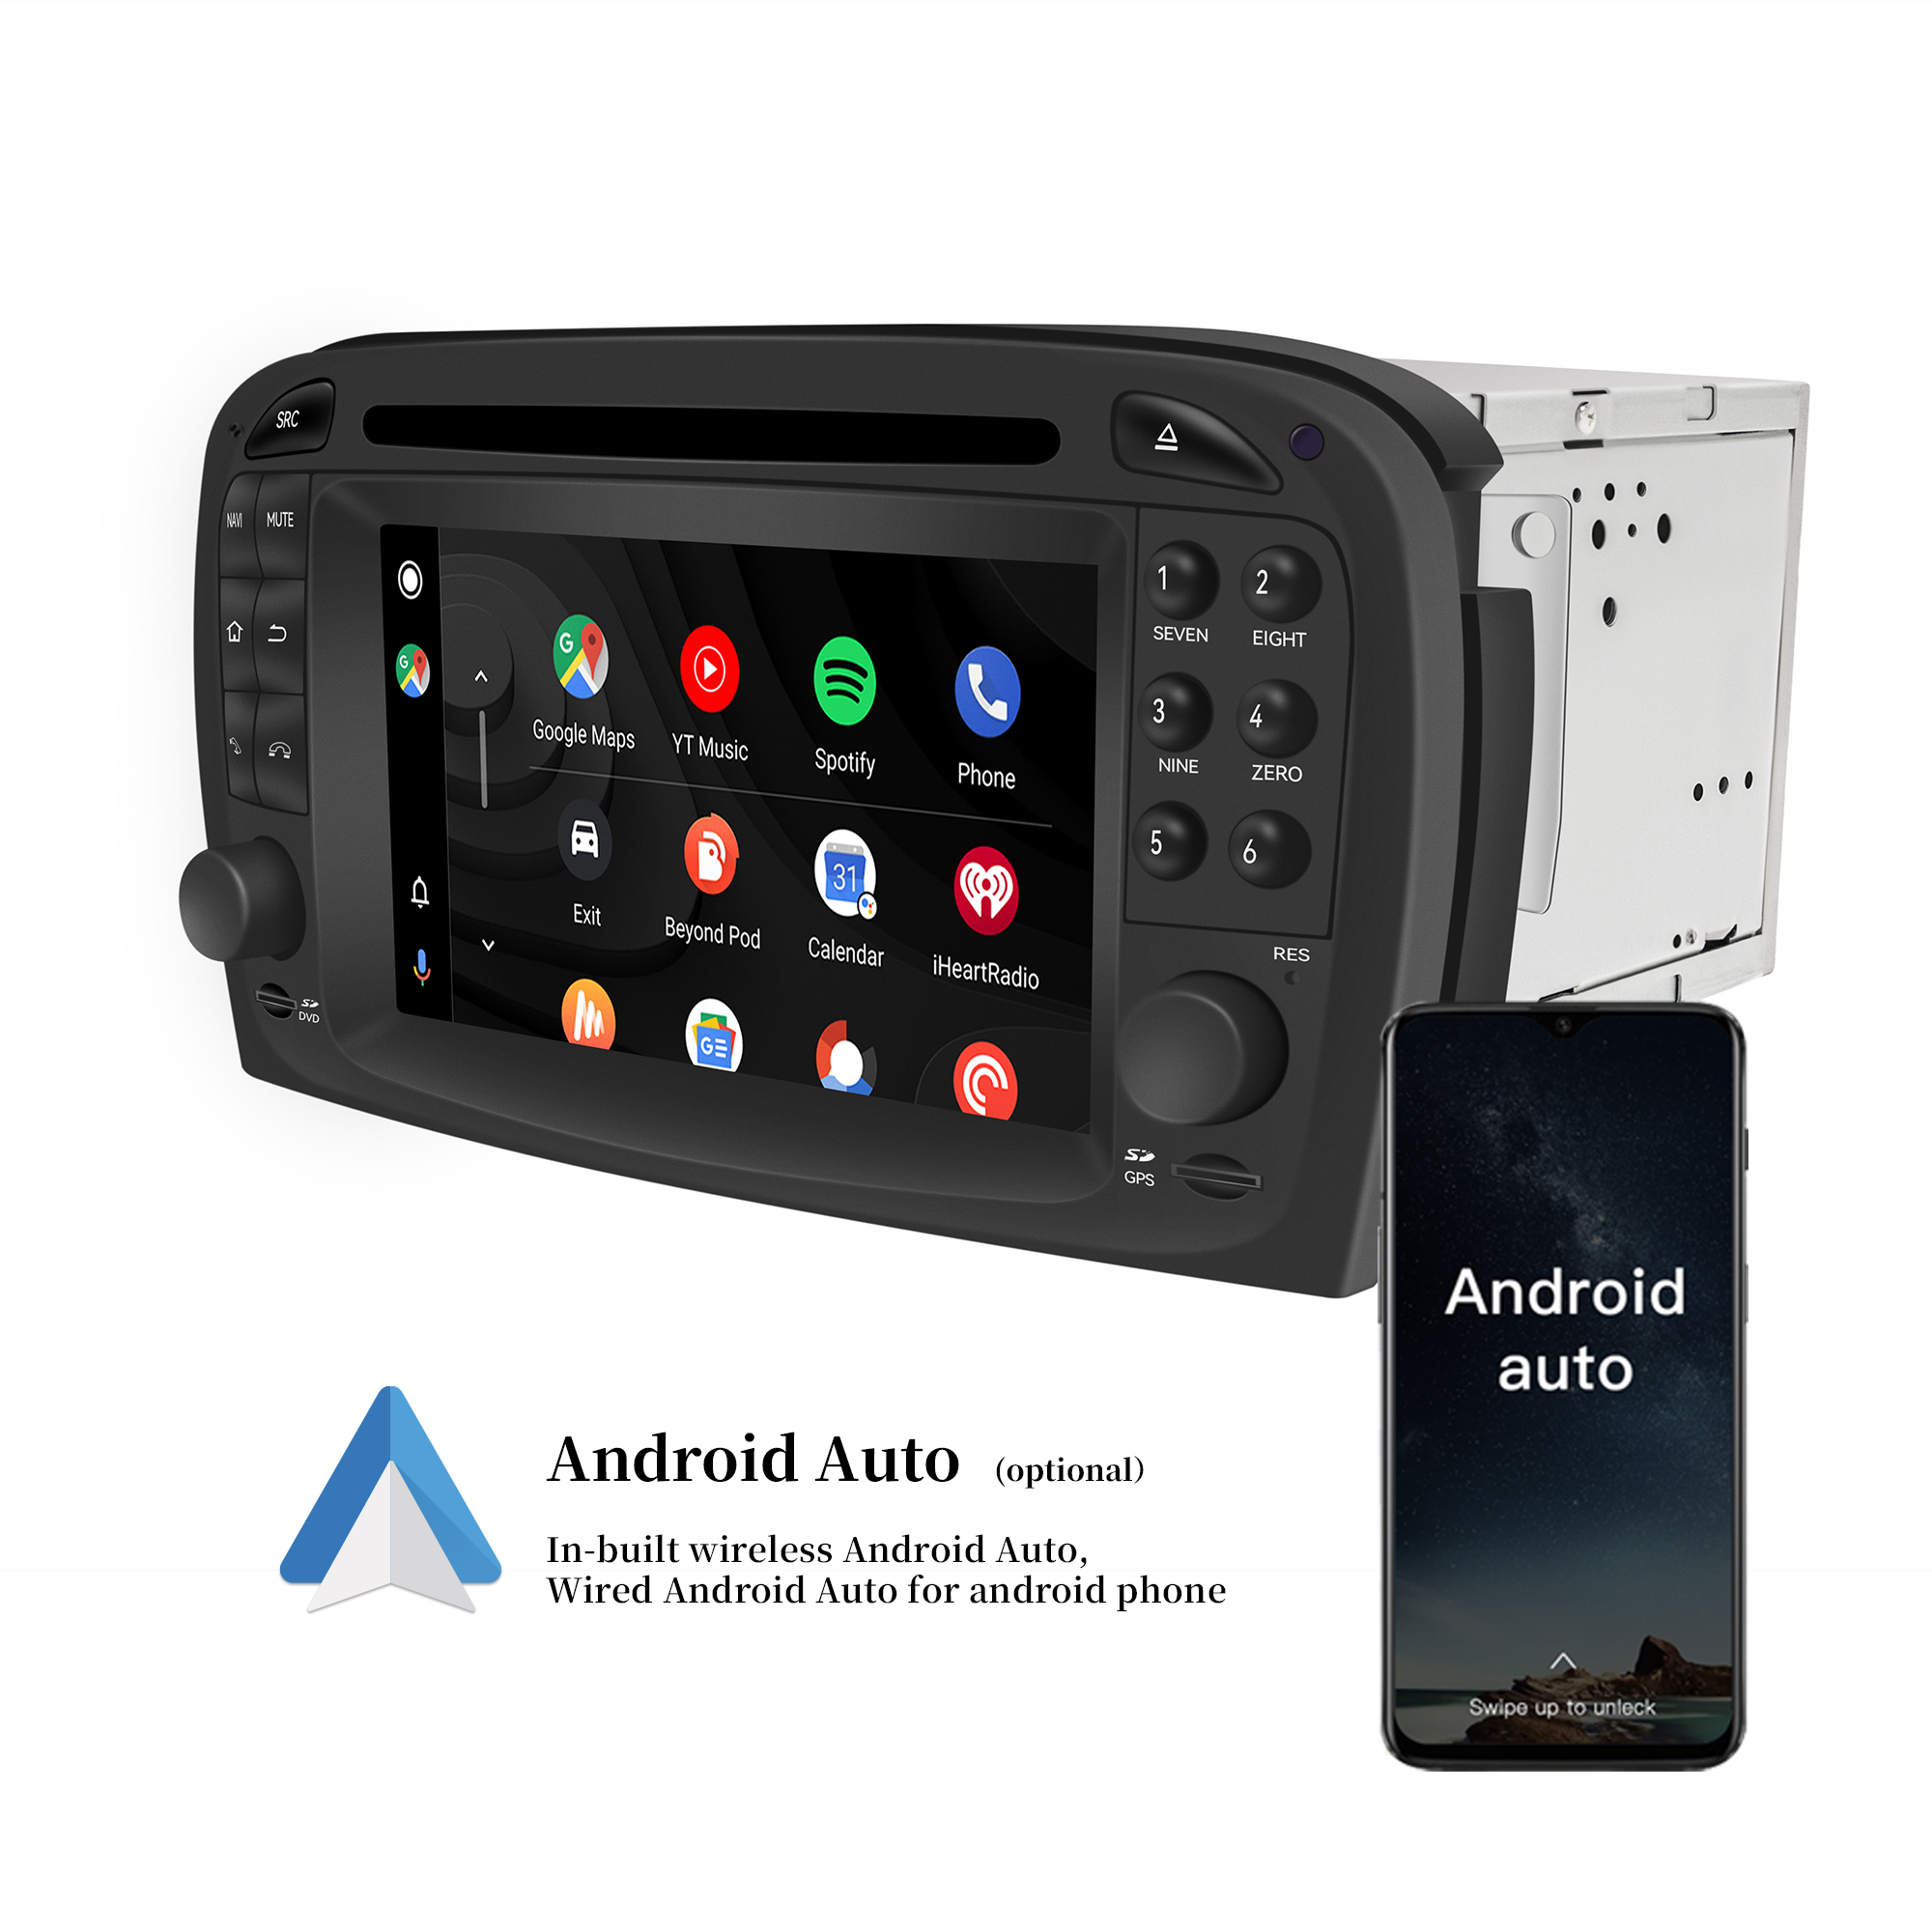 Hualingan AutoRadio for Mercedes Comand SL500 R230 Radio Stereo SL300 SL350 SL55 SL63 Head Unit Upgrade 6.2"Touch Screen DVD Apple CarPlay Android Auto Replacement Aftermarket Navigation 2003 2005 